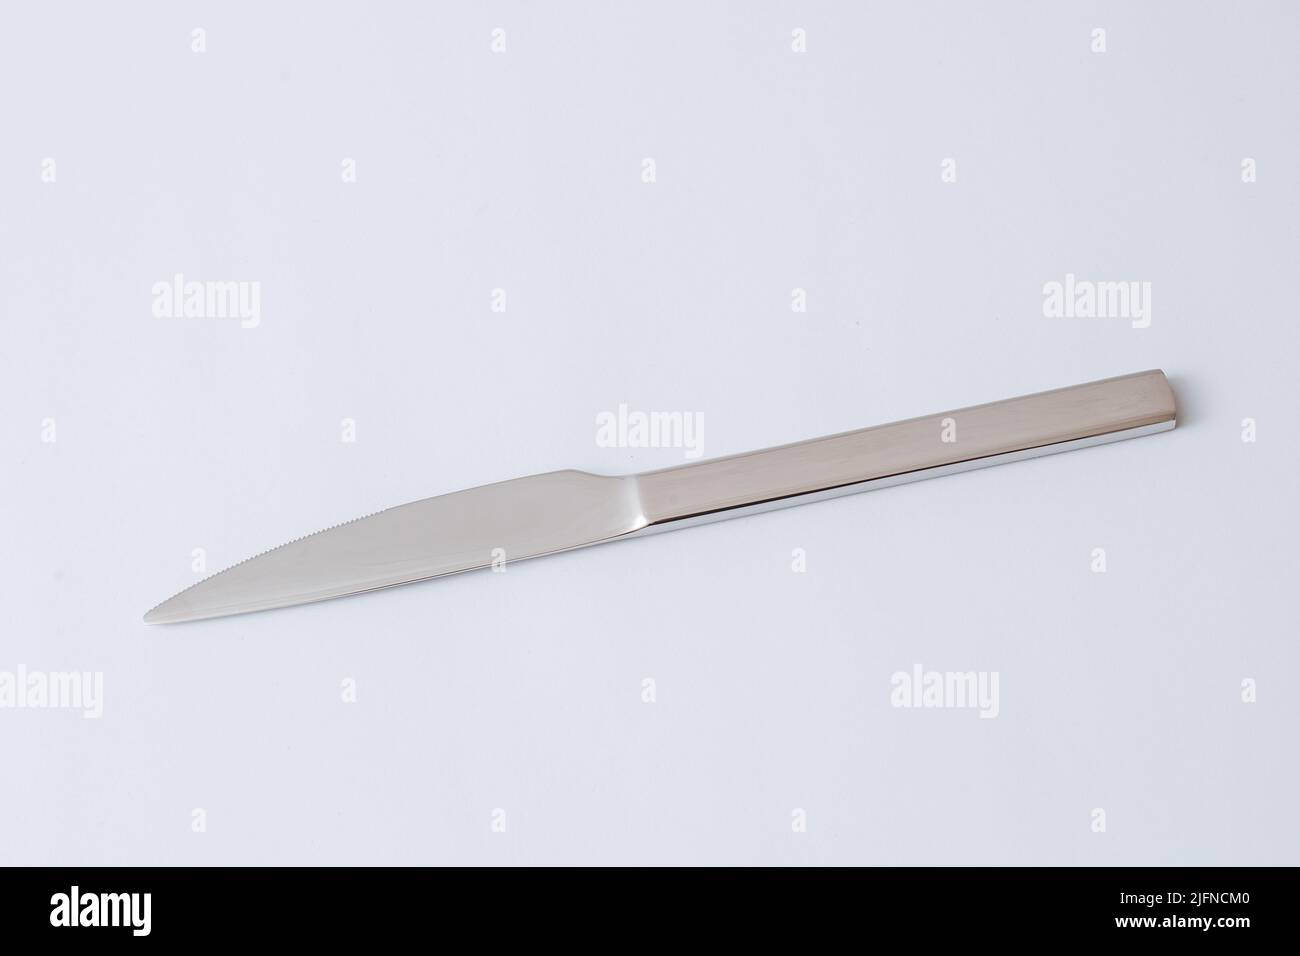 Stainless steel knife on white background, table knife, copy space. Stock Photo